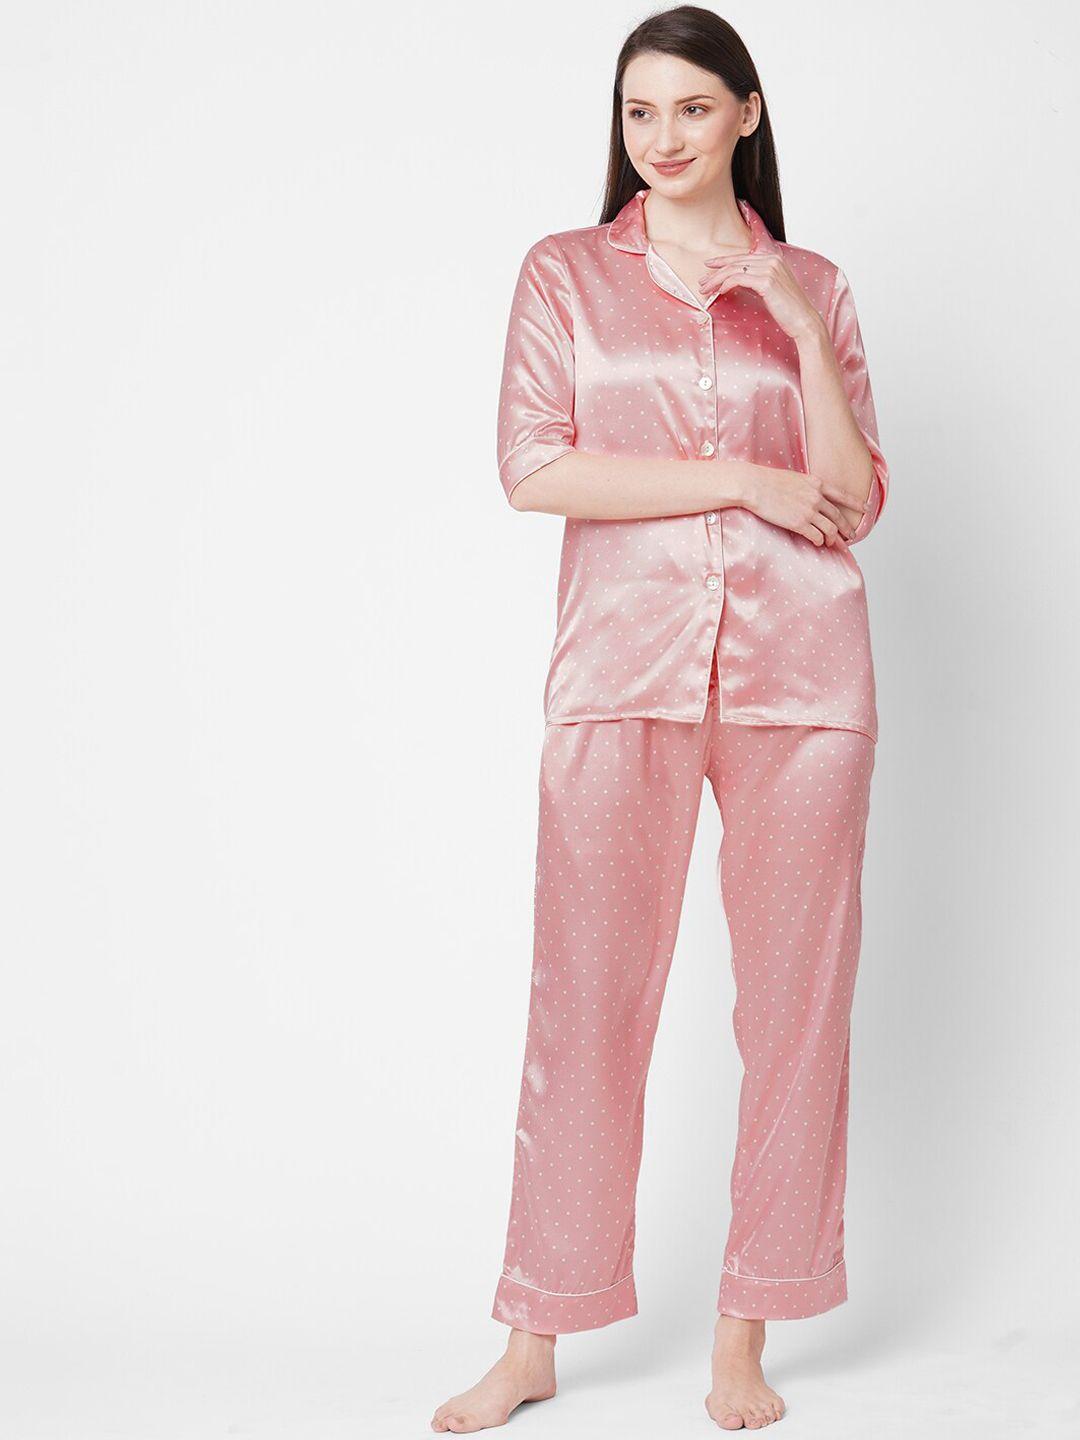 sweet-dreams-women-peach-coloured-&-white-printed-night-suit